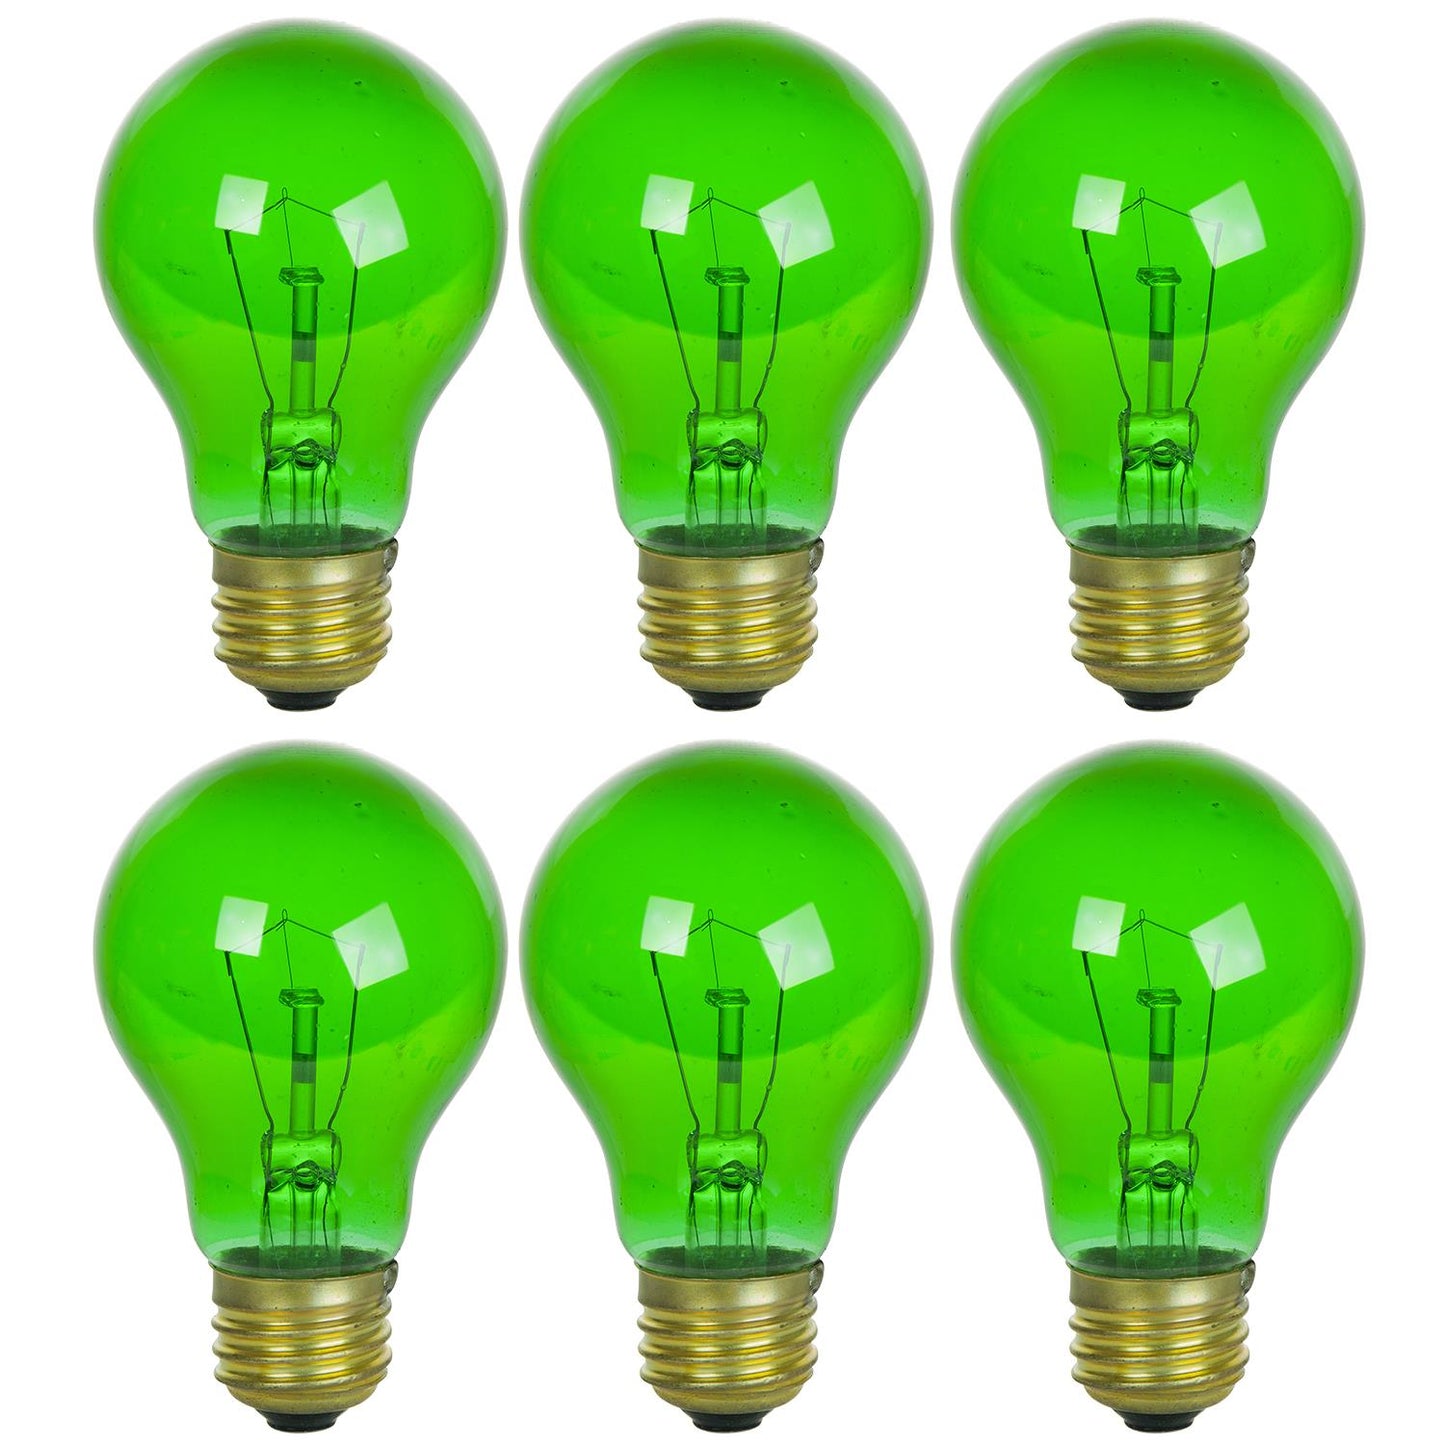 6 Pack of Sunlite 25 watt Transparent Green Colored Incandescent Light Bulb - Parties, Decorative, and Holiday 2,000 Average Life Hours